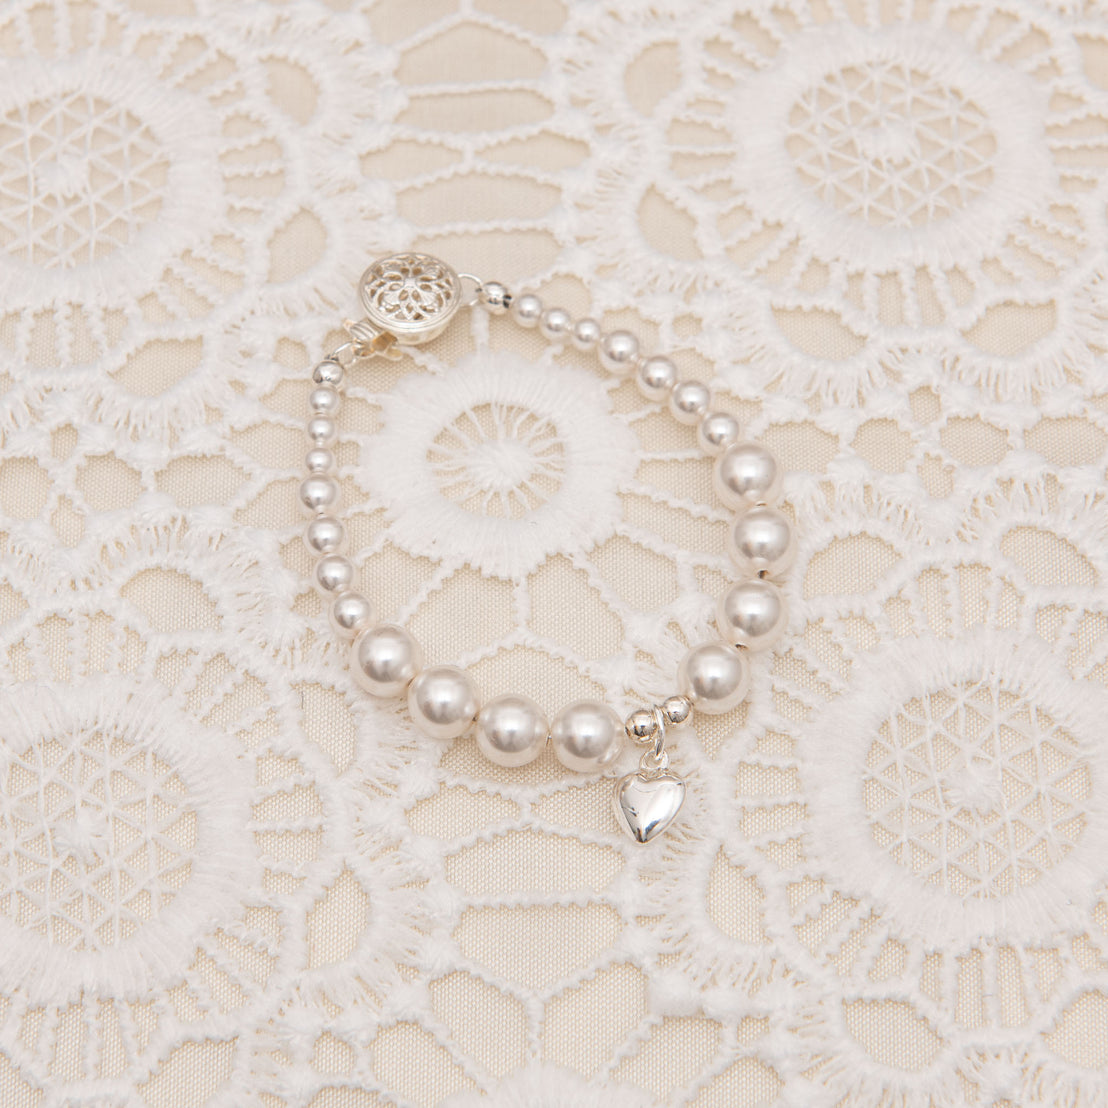 White Luster Pearl Bracelet with Silver Heart Charm